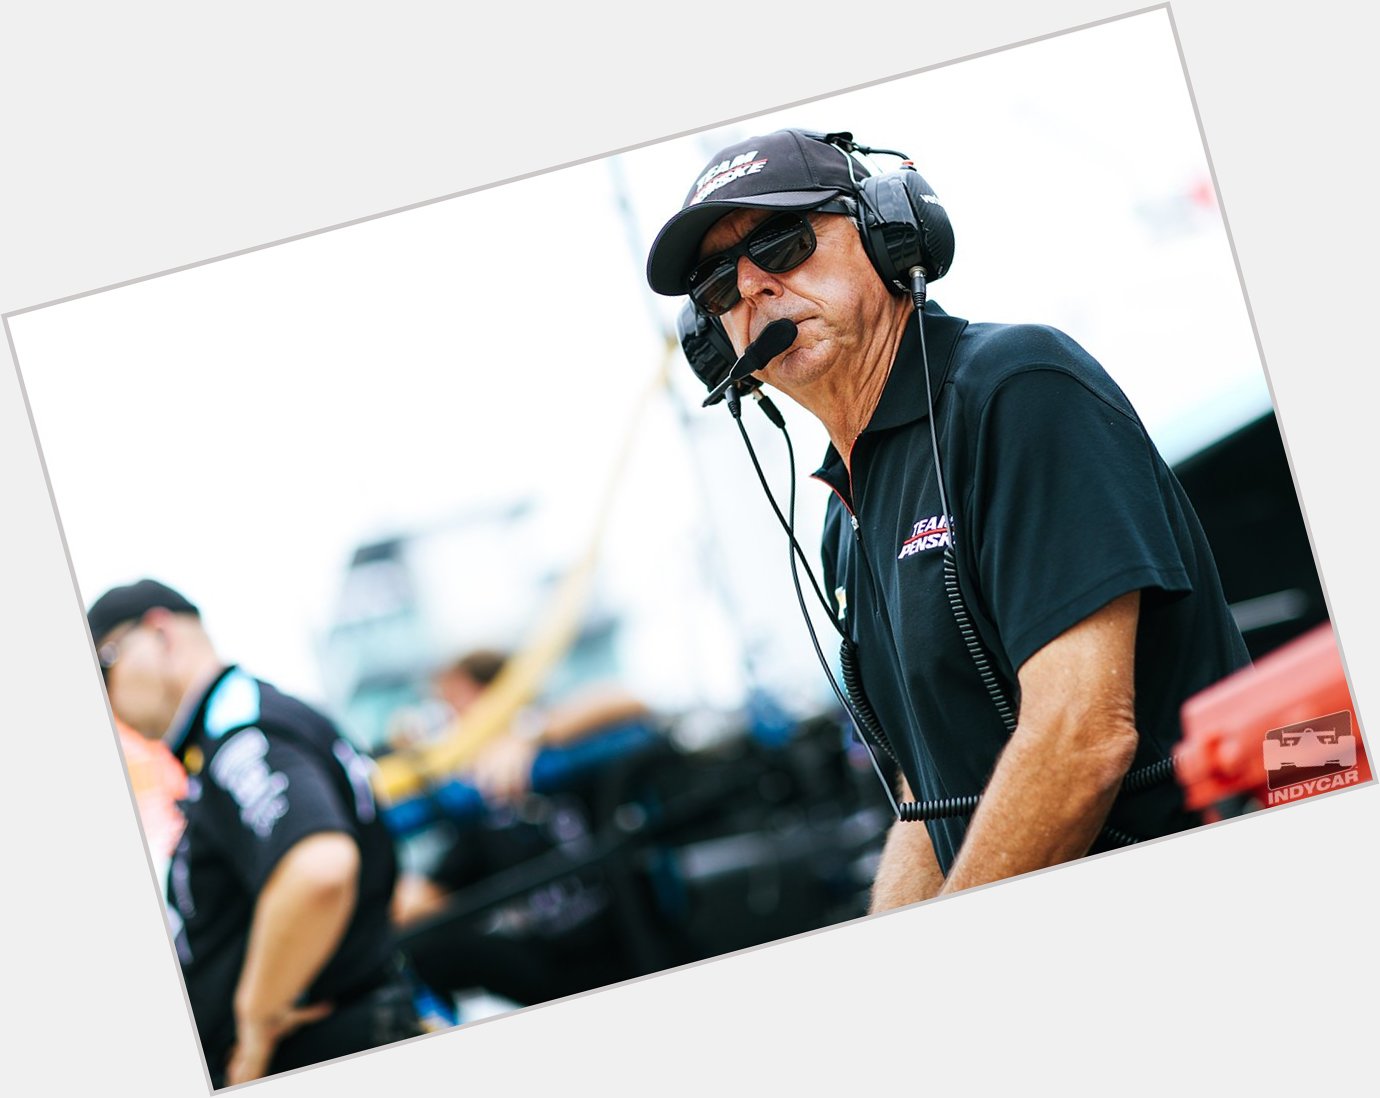 Happy birthday, Rick Mears! One of the greats. // 